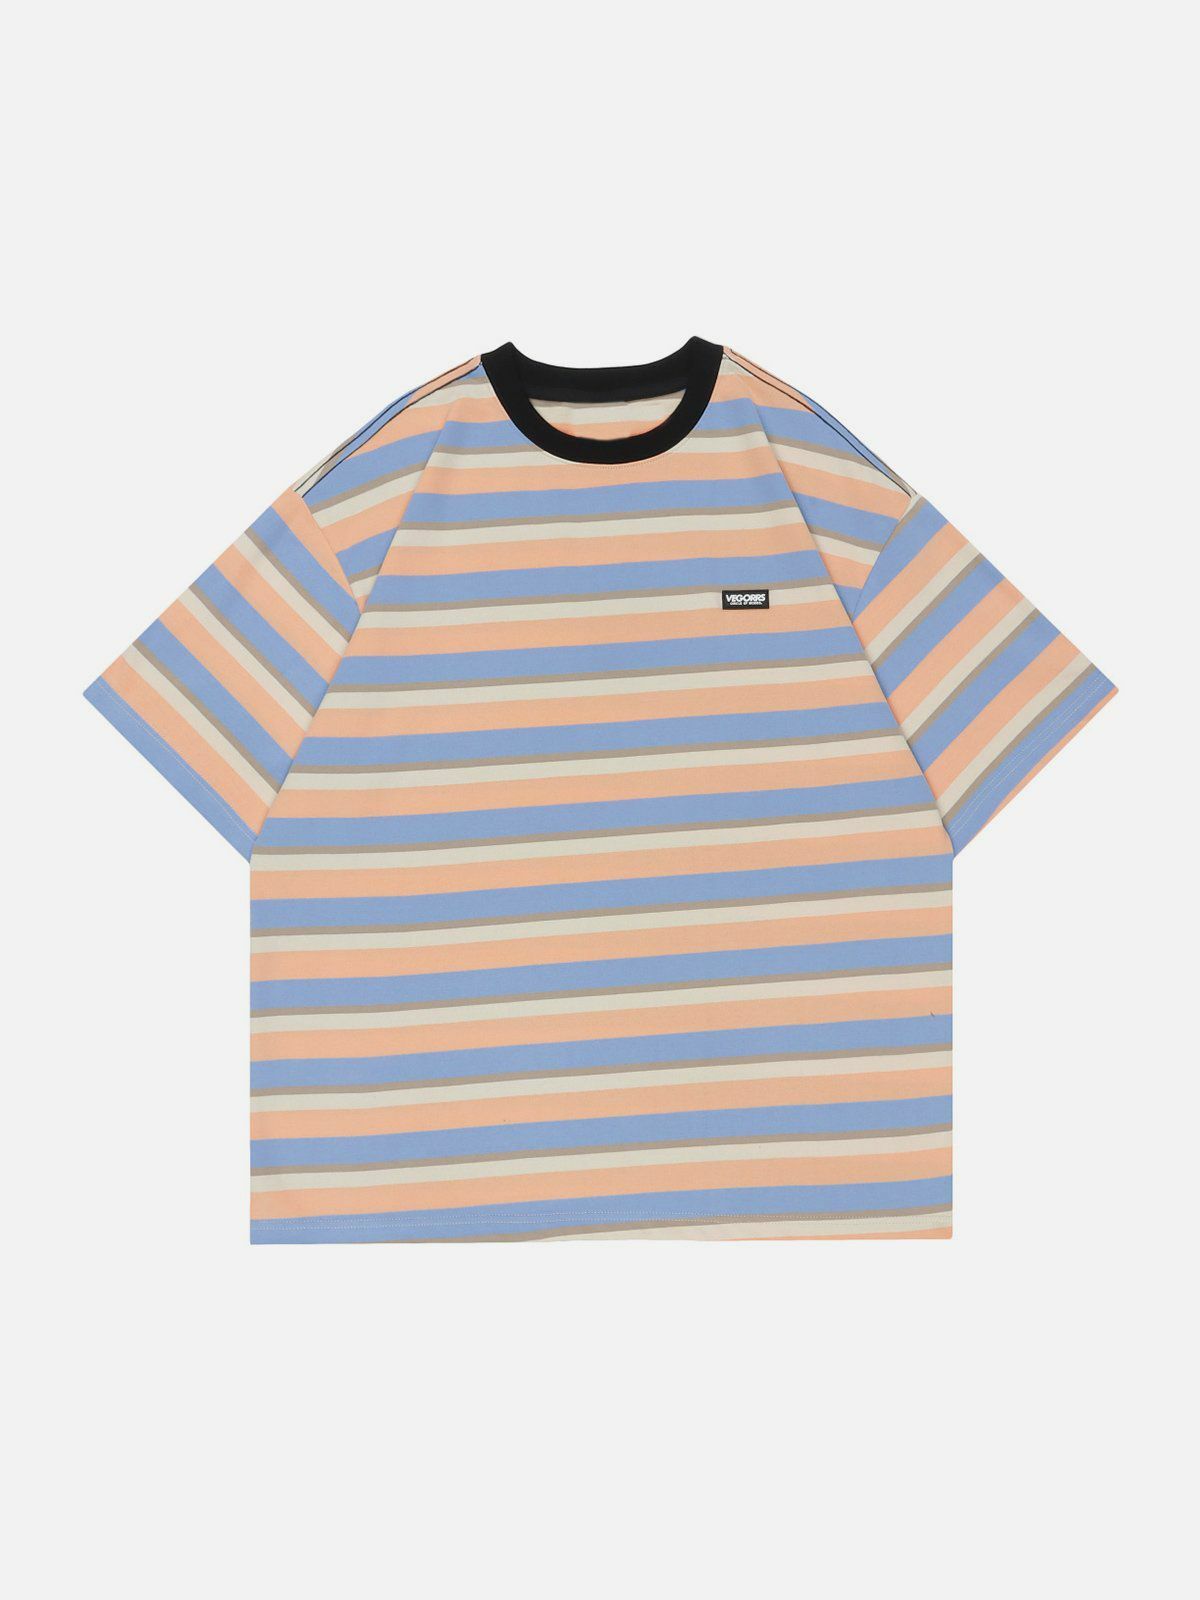 revolutionary striped tee edgy  retro streetwear for youthful style 5829